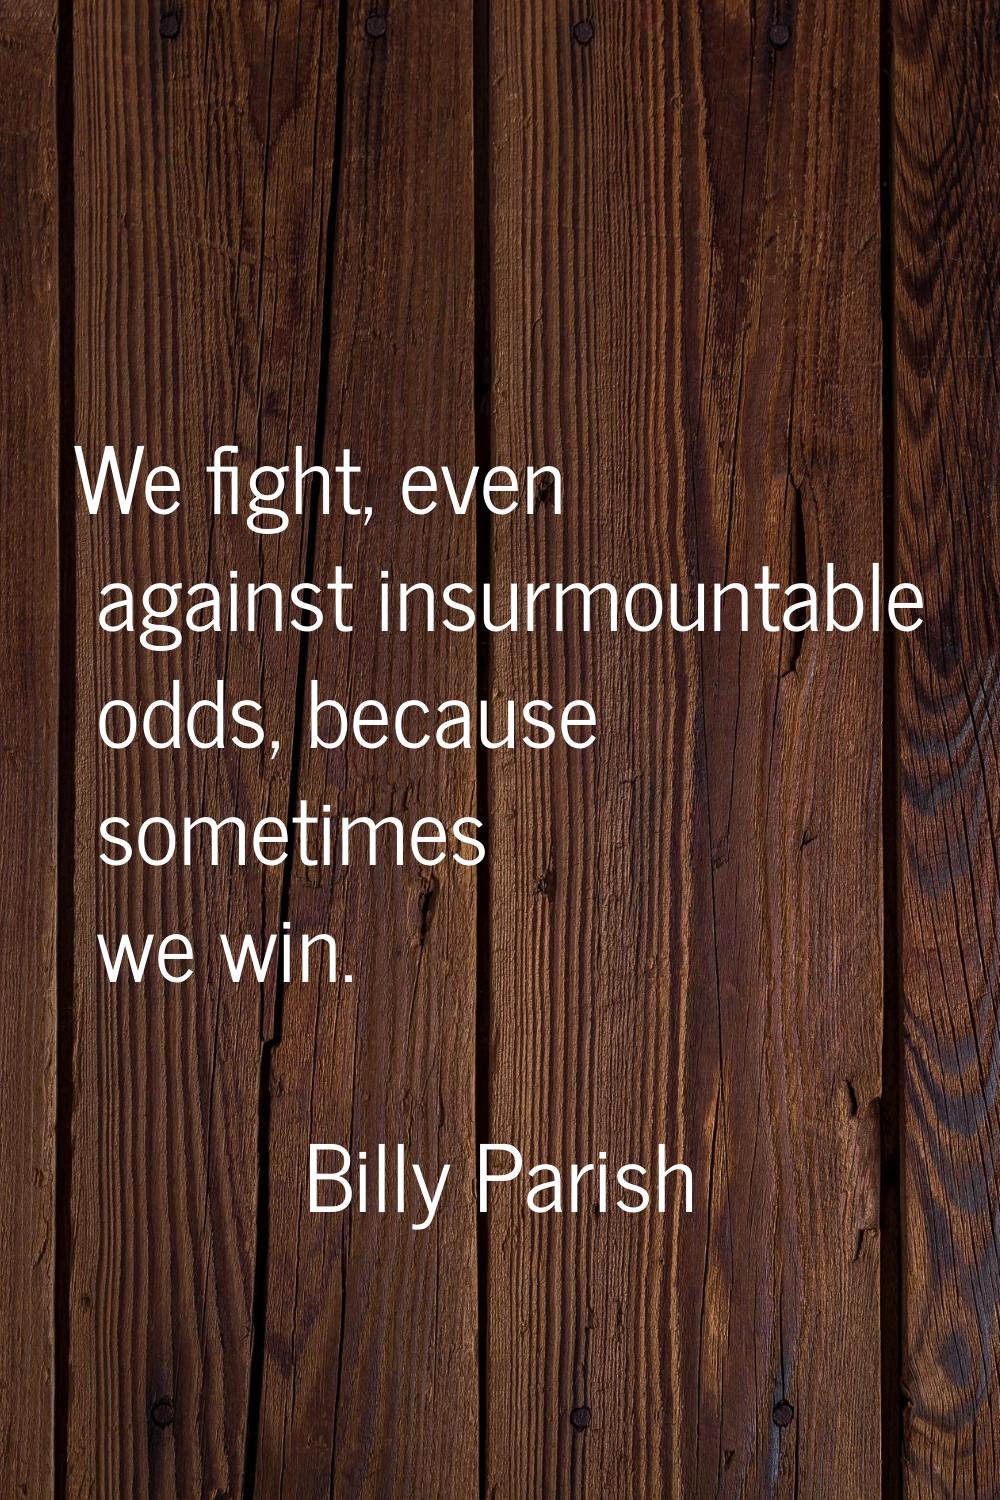 We fight, even against insurmountable odds, because sometimes we win.